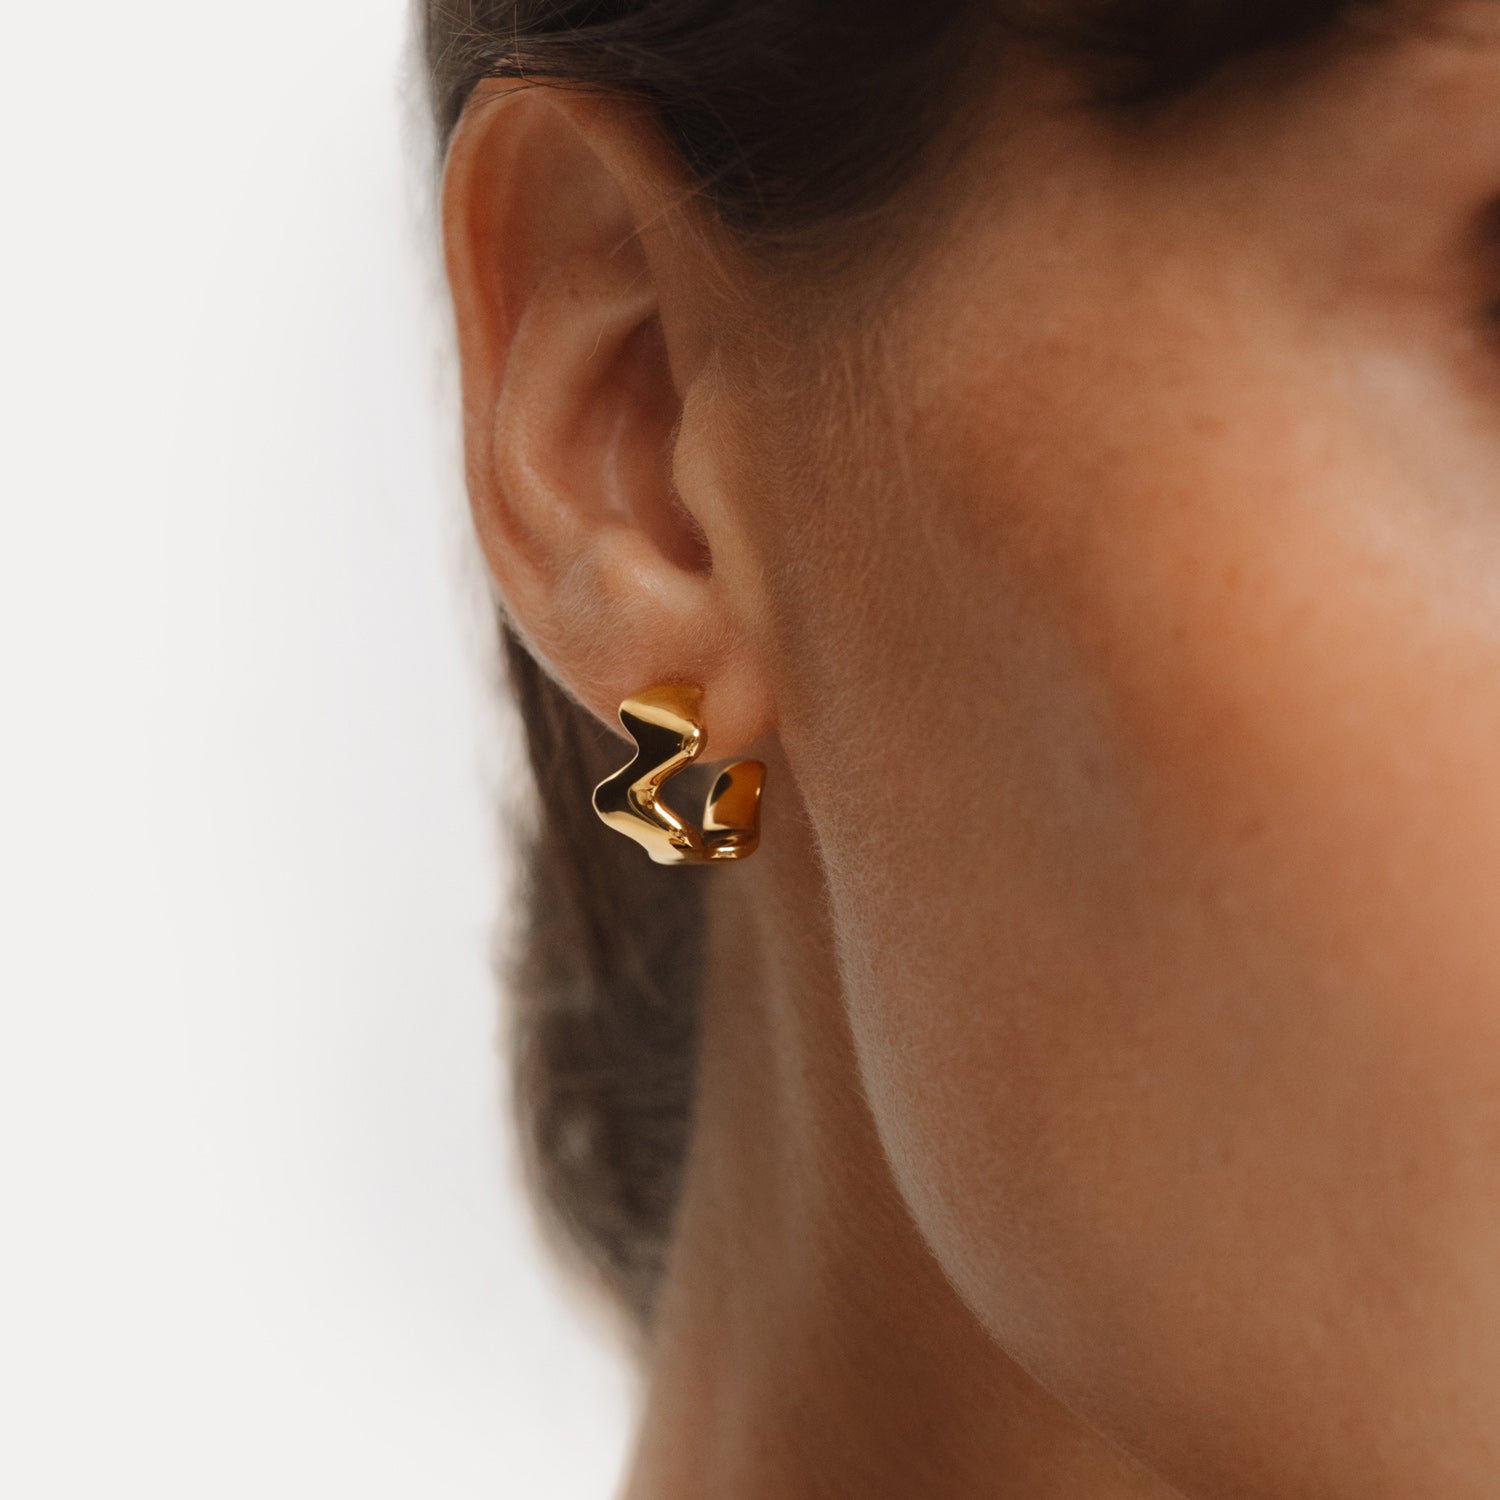 The POISE Huggie Hoops in 18k Gold Vermeil shown on the ear of a model.